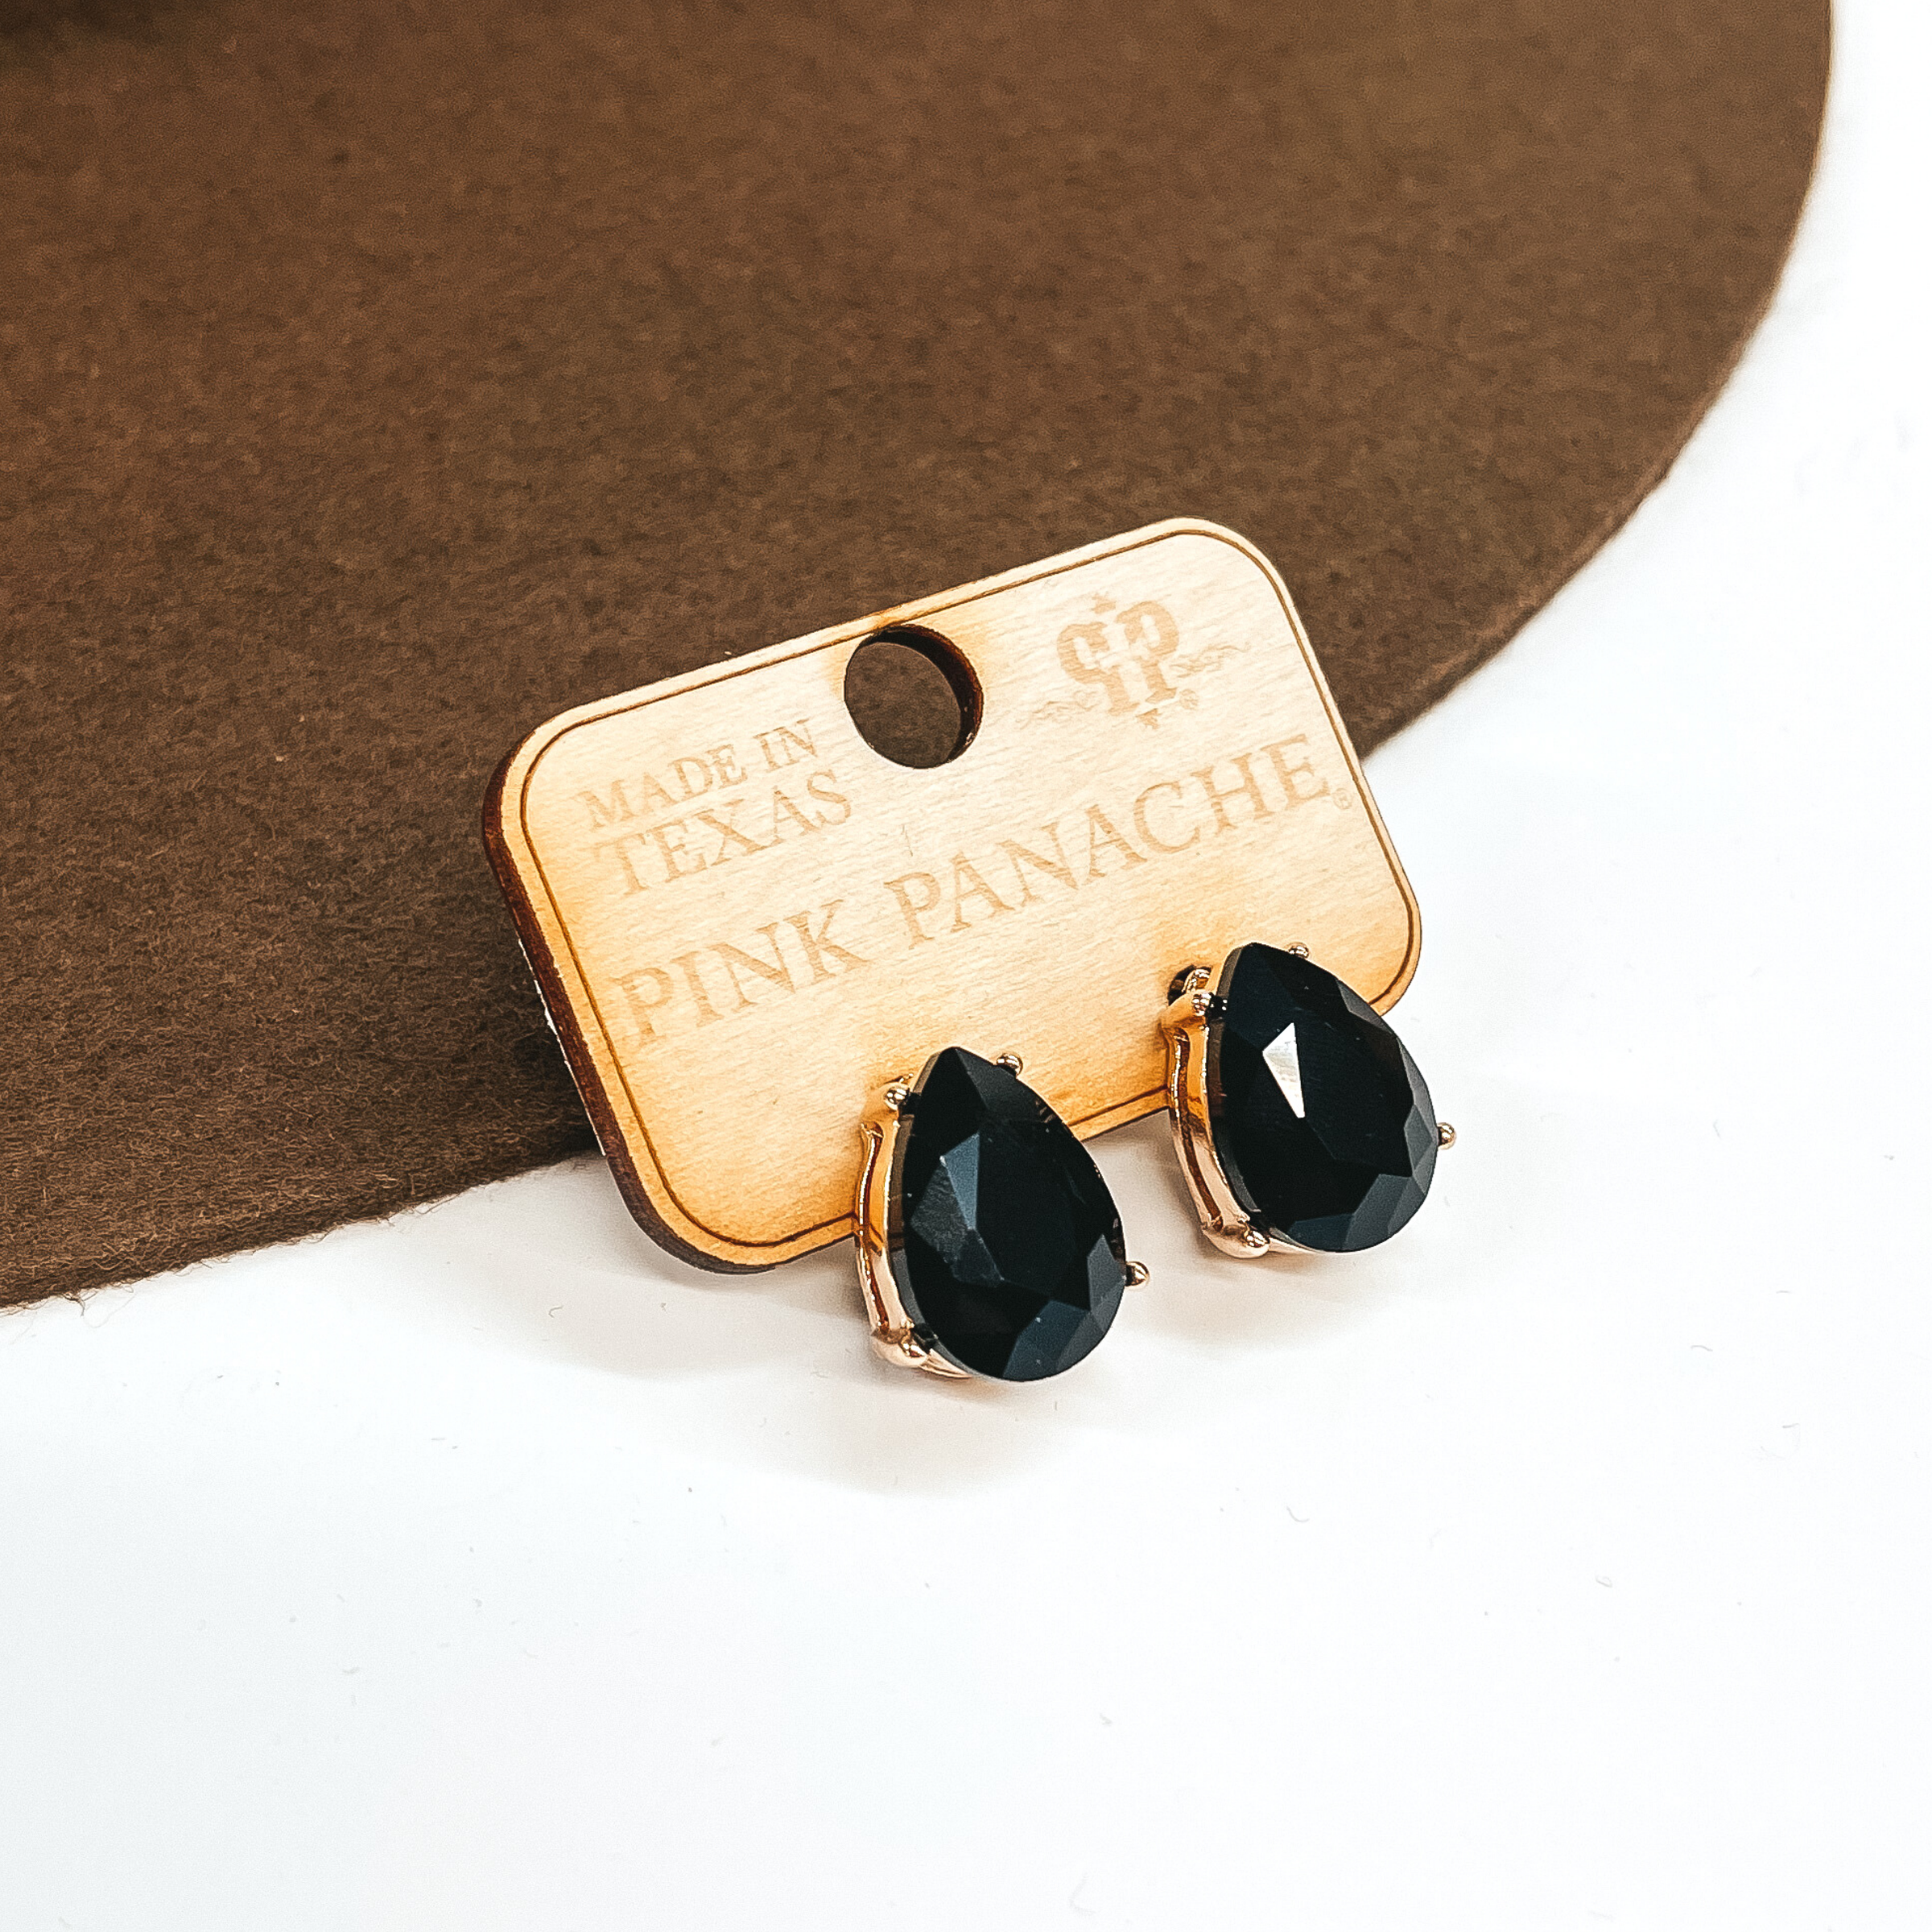 Pink Panache | Teardrop Black Crystal Post Earrings in a Gold Setting - Giddy Up Glamour Boutique